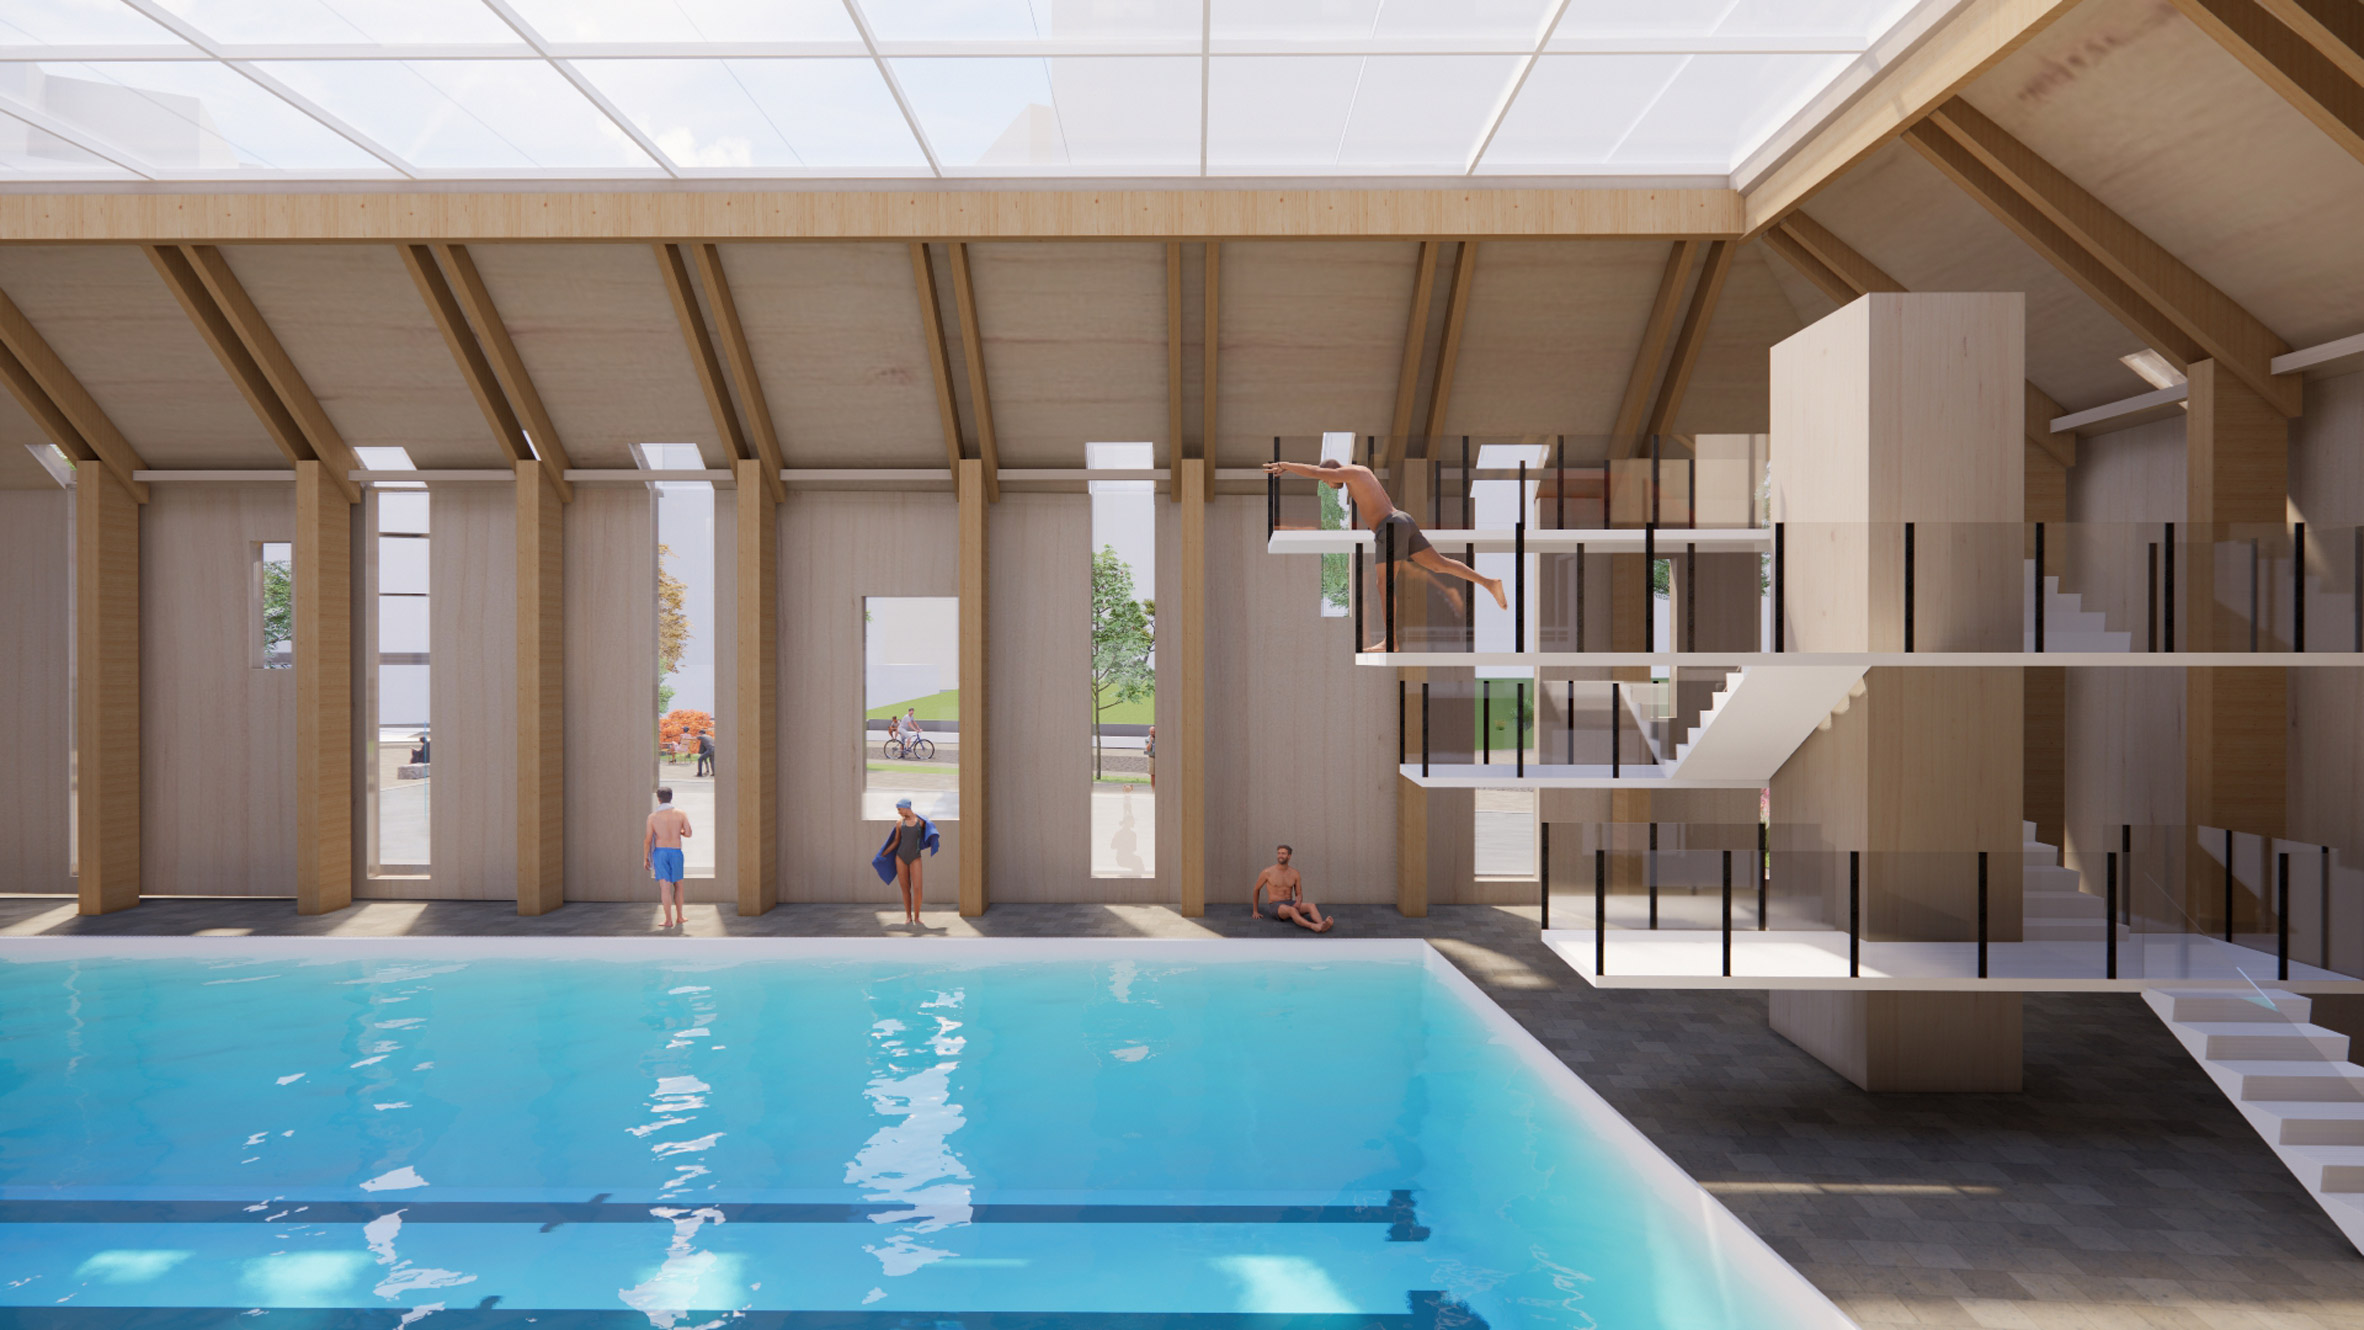 Visualisation showing an indoor swimming pool with diving boards